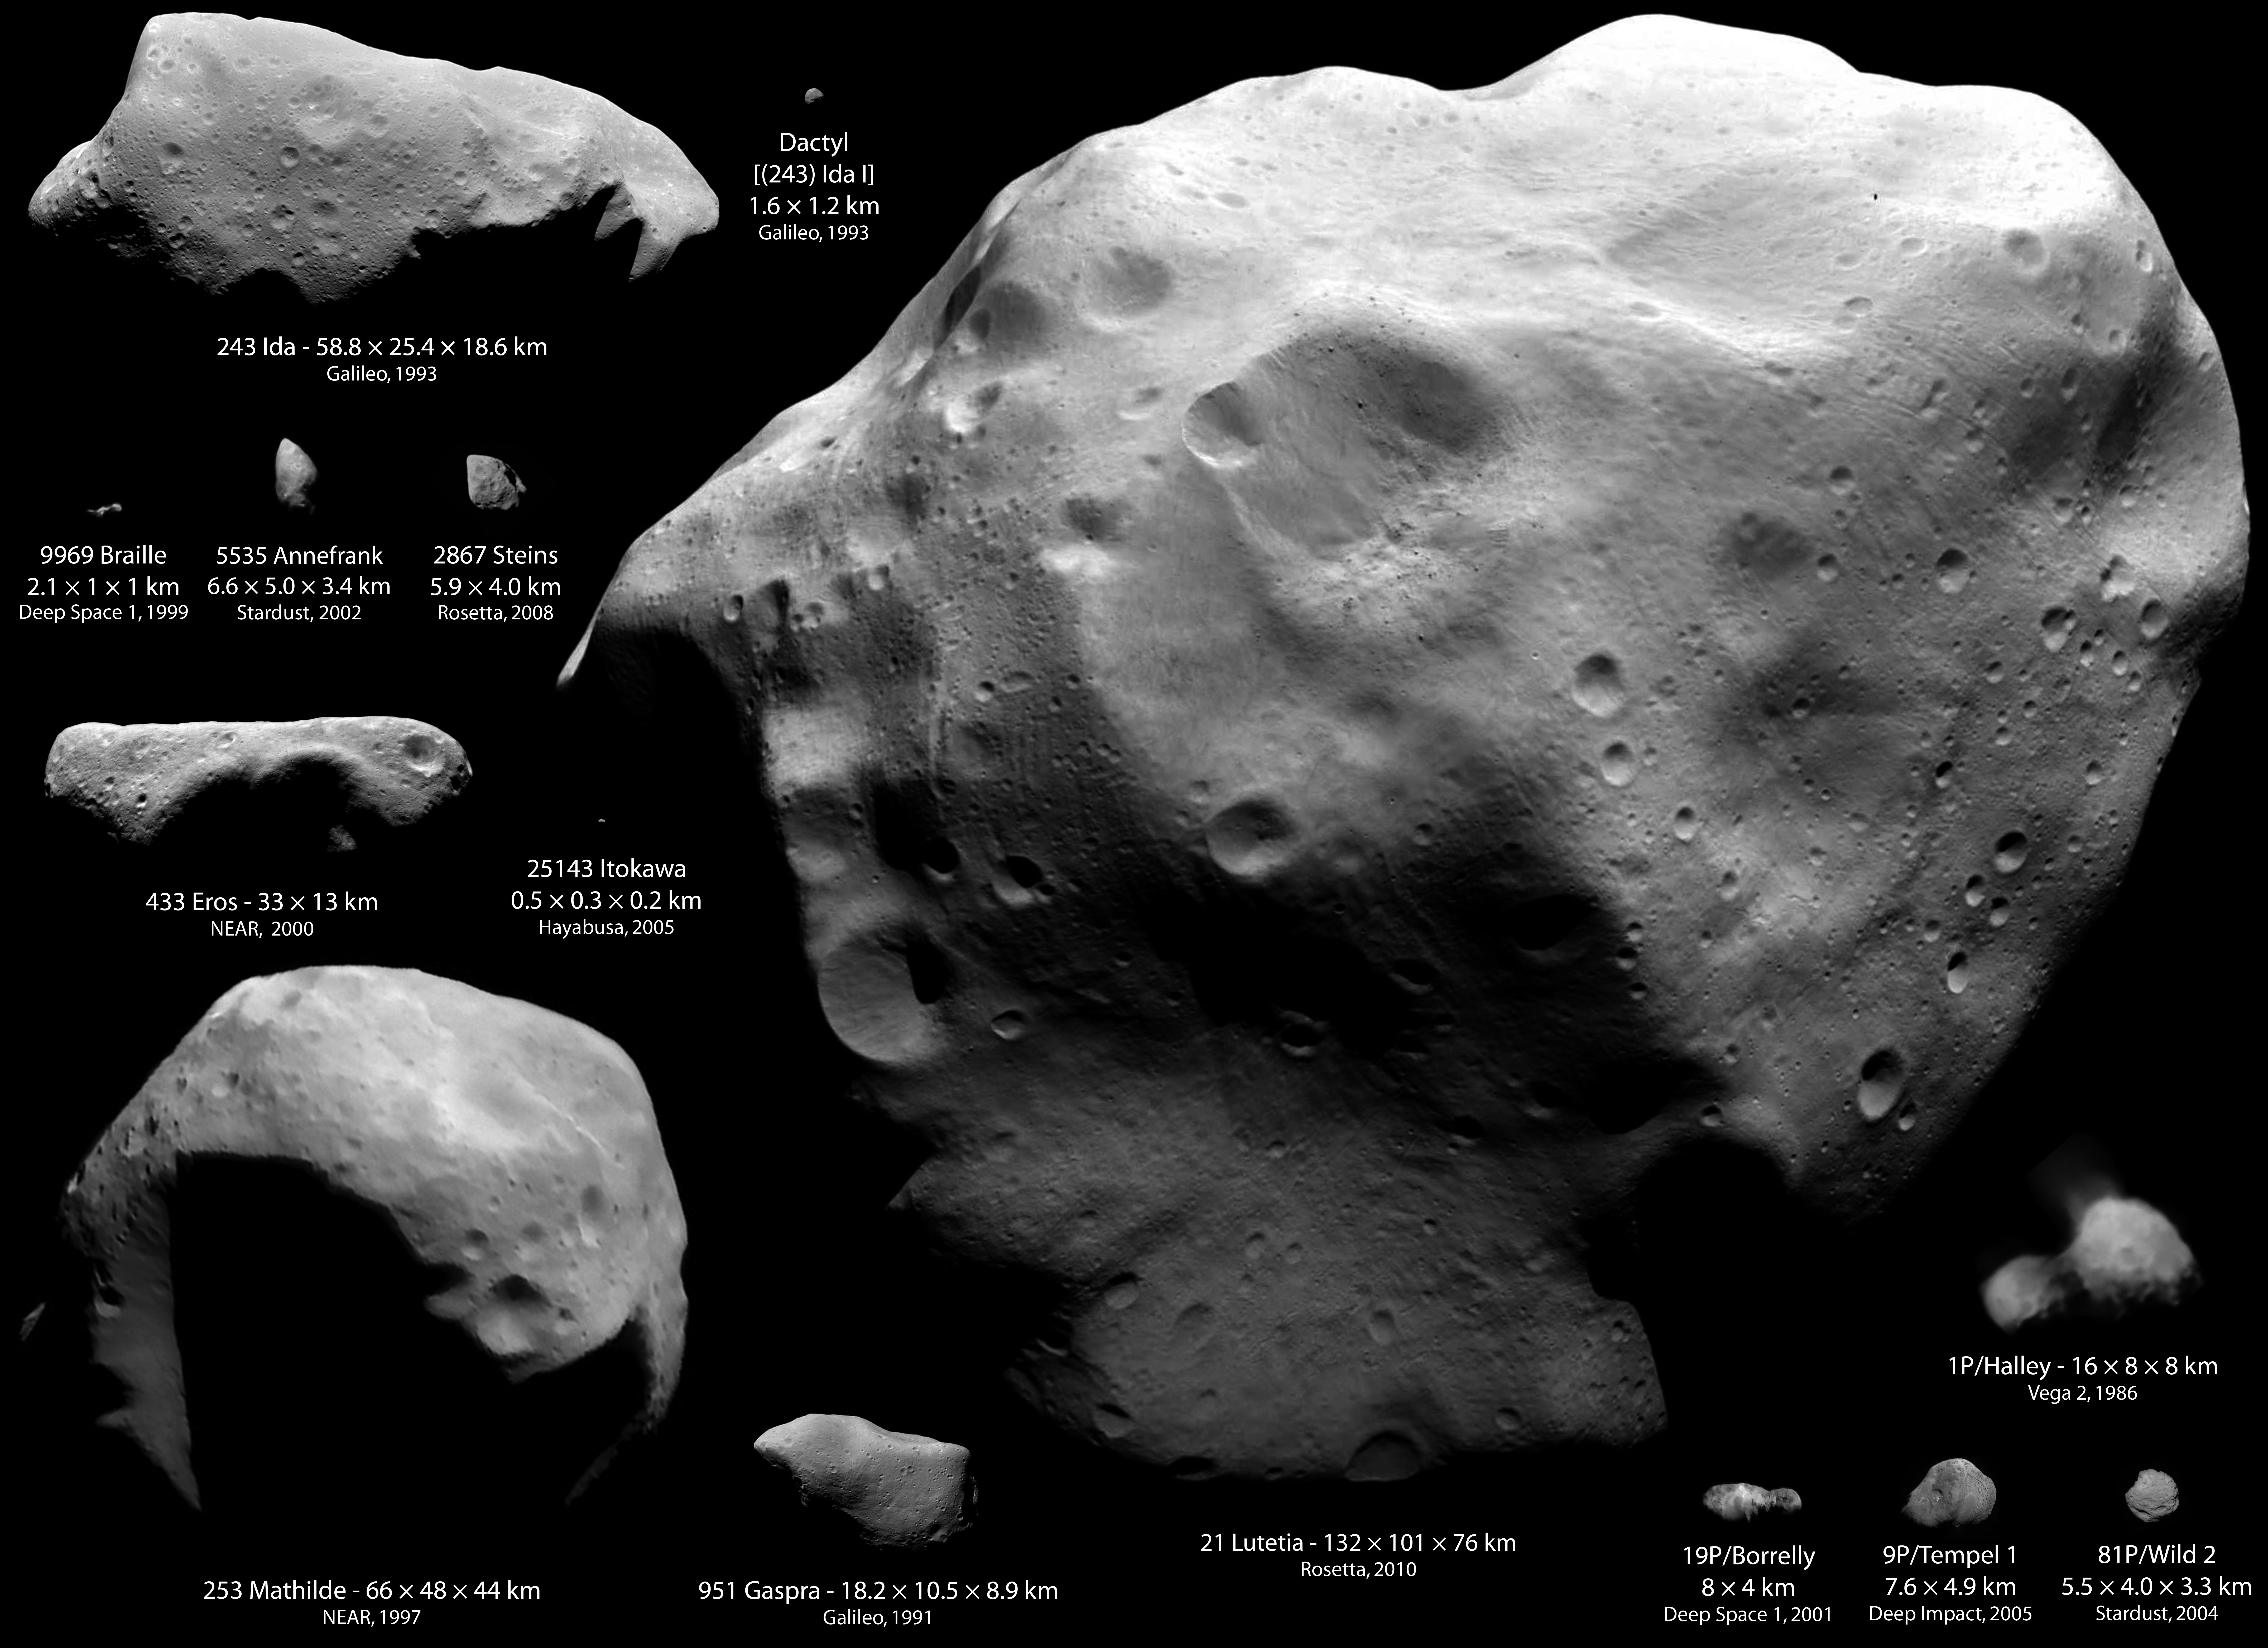 Lutetia: The Largest Asteroid Yet Visited